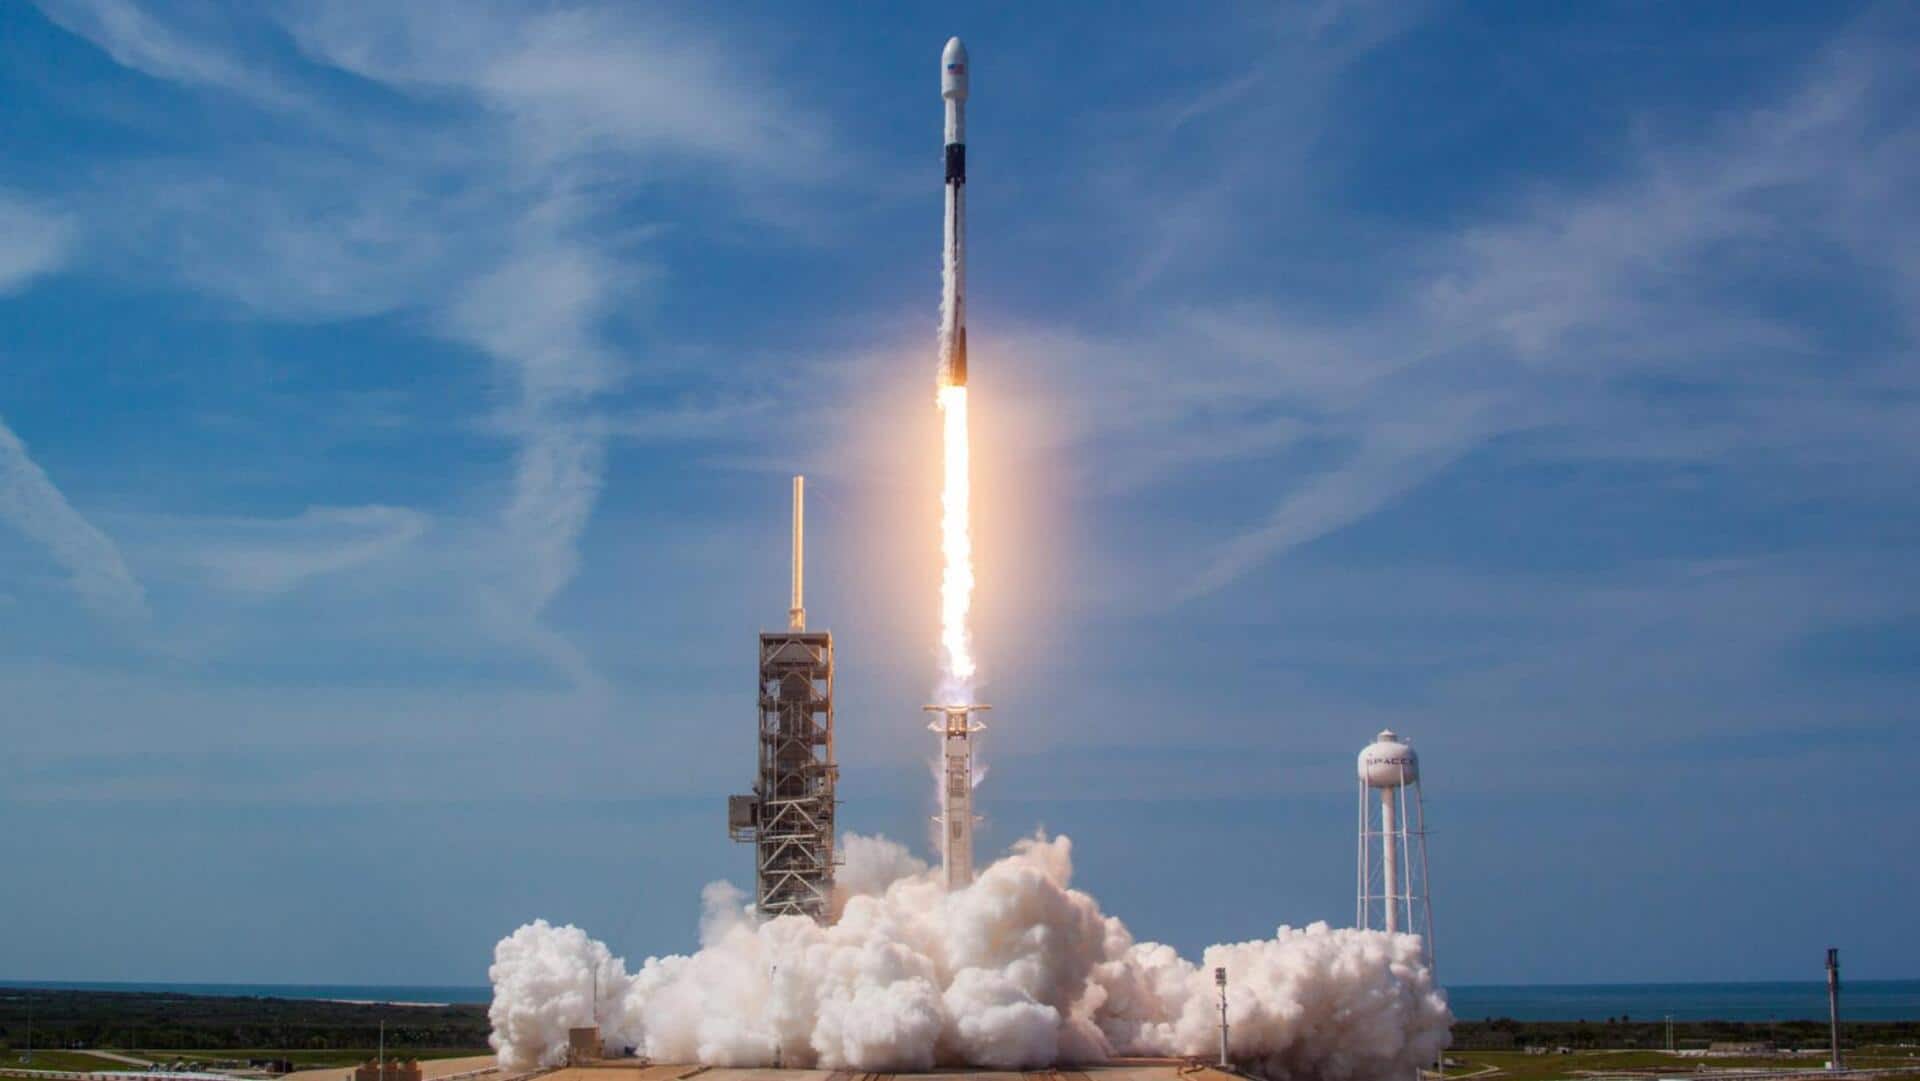 SpaceX Falcon 9 breaks reusability record with its 19th launch